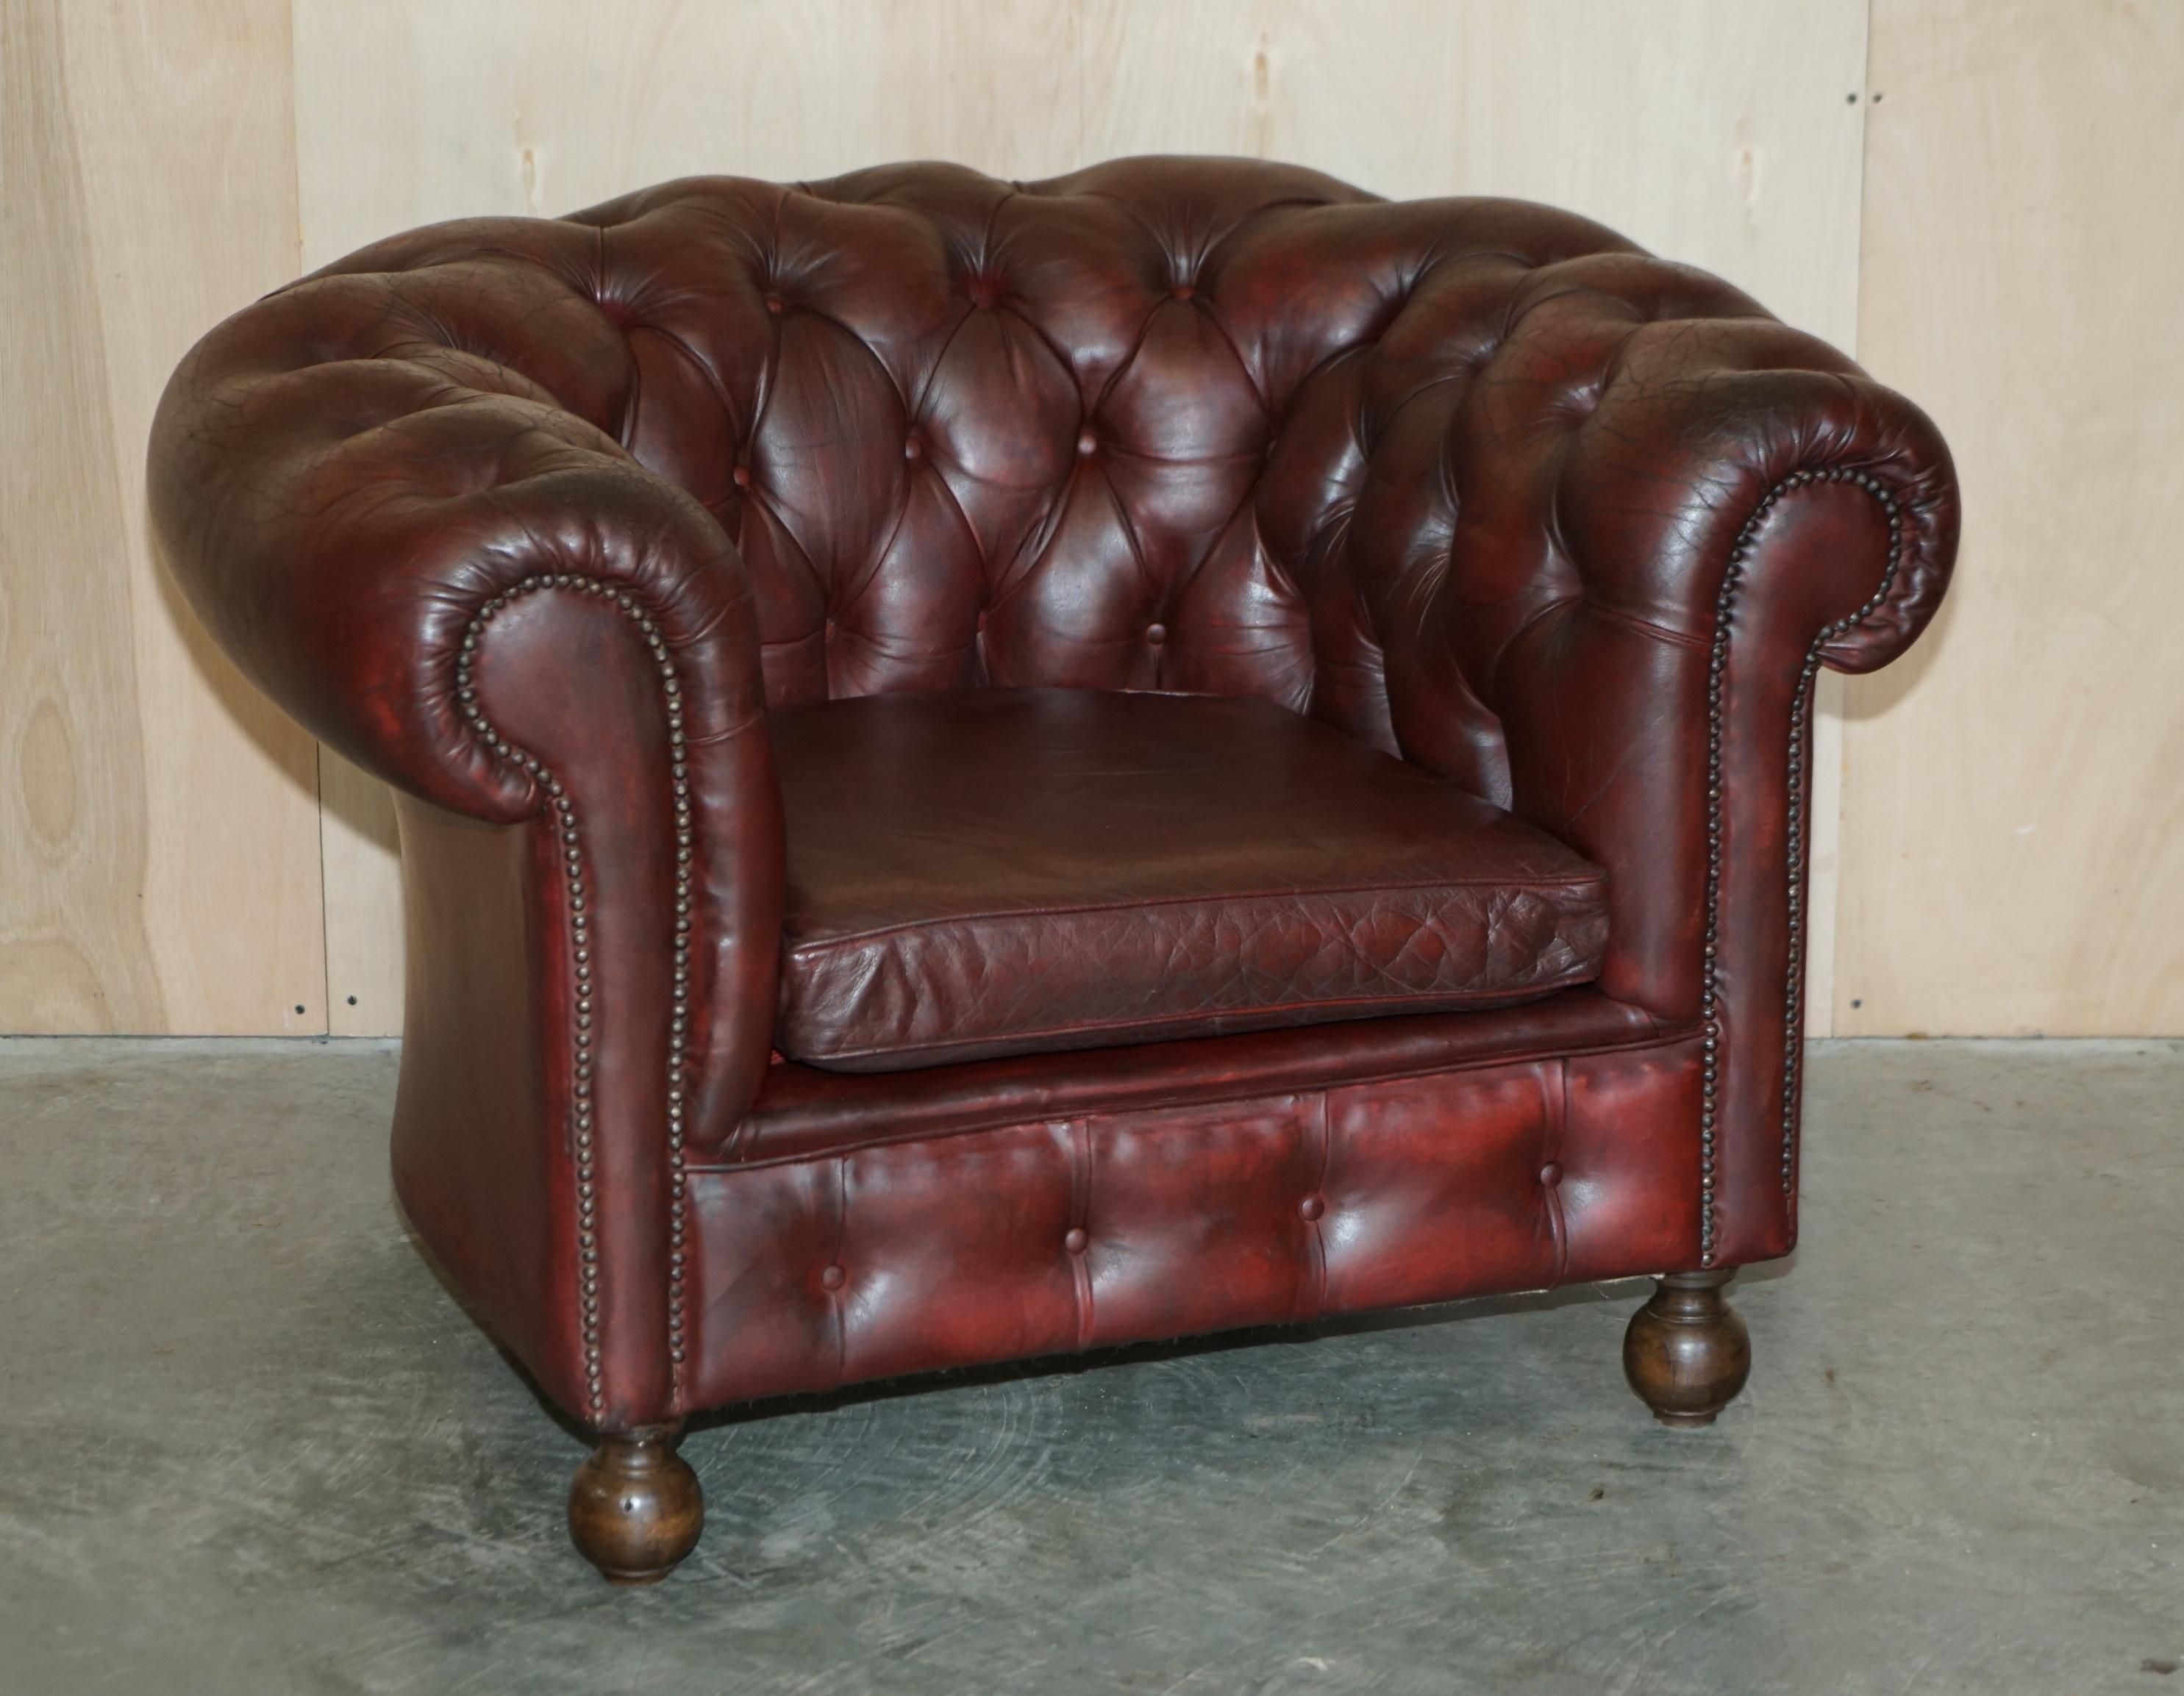 PAIR OF LOVELY ANTIQUE OXBLOOD LEATHER CHESTERFIELD GENTLEMAN'S CLUB ARMCHAiRS For Sale 10